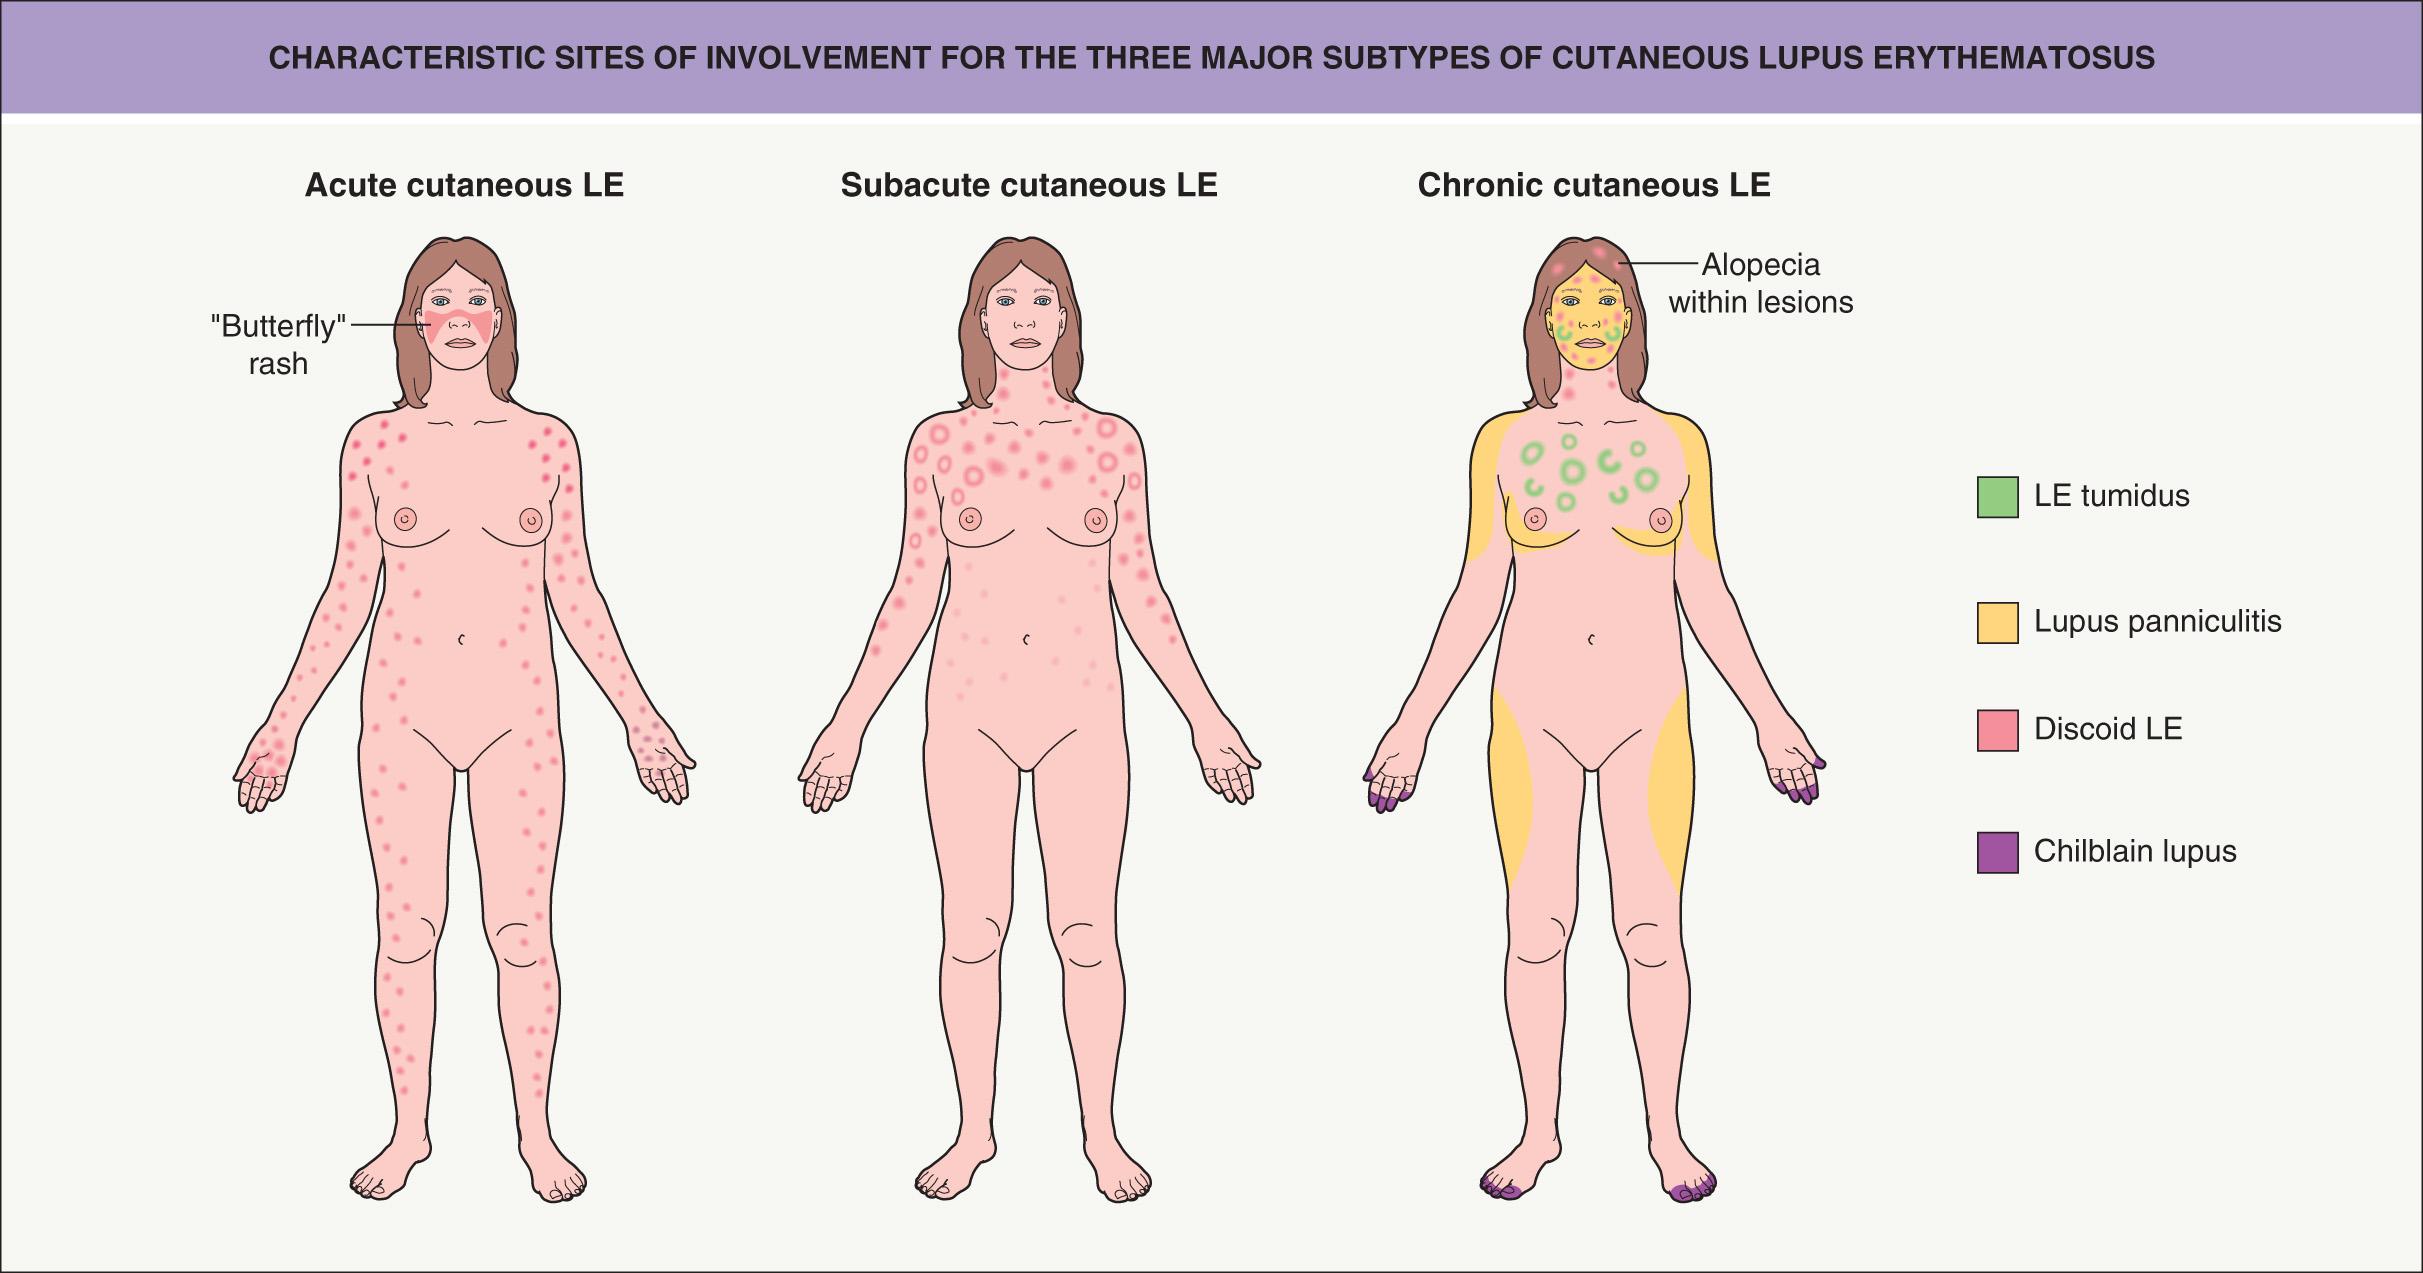 Fig. 41.4, Characteristic sites of involvement for the three major forms of cutaneous lupus erythematosus (LE).